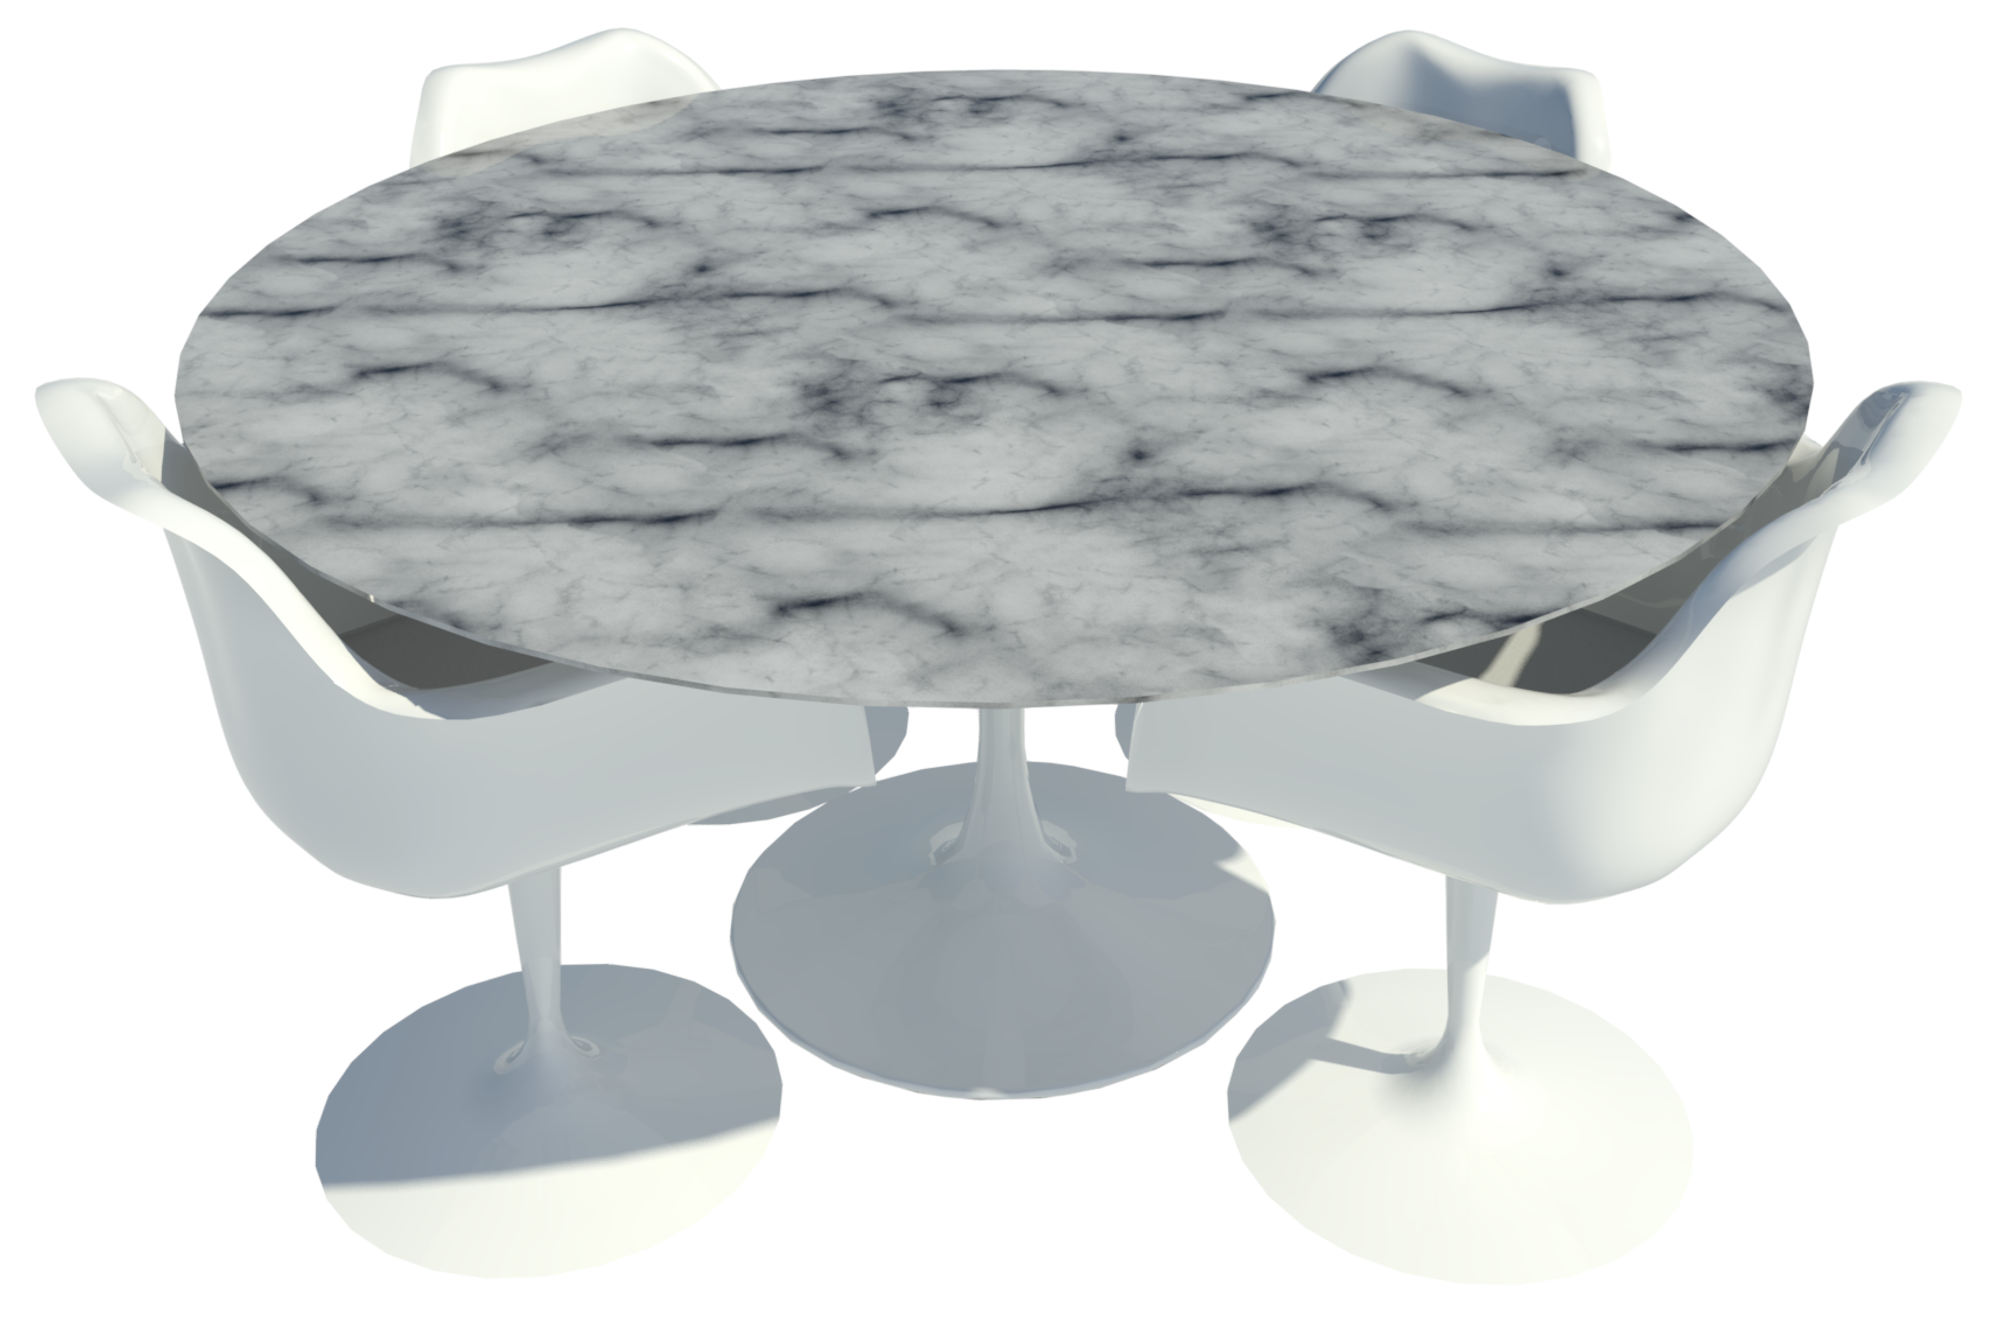 Revit raytrace of Tulip chair and dining table by Eero Saarinen.